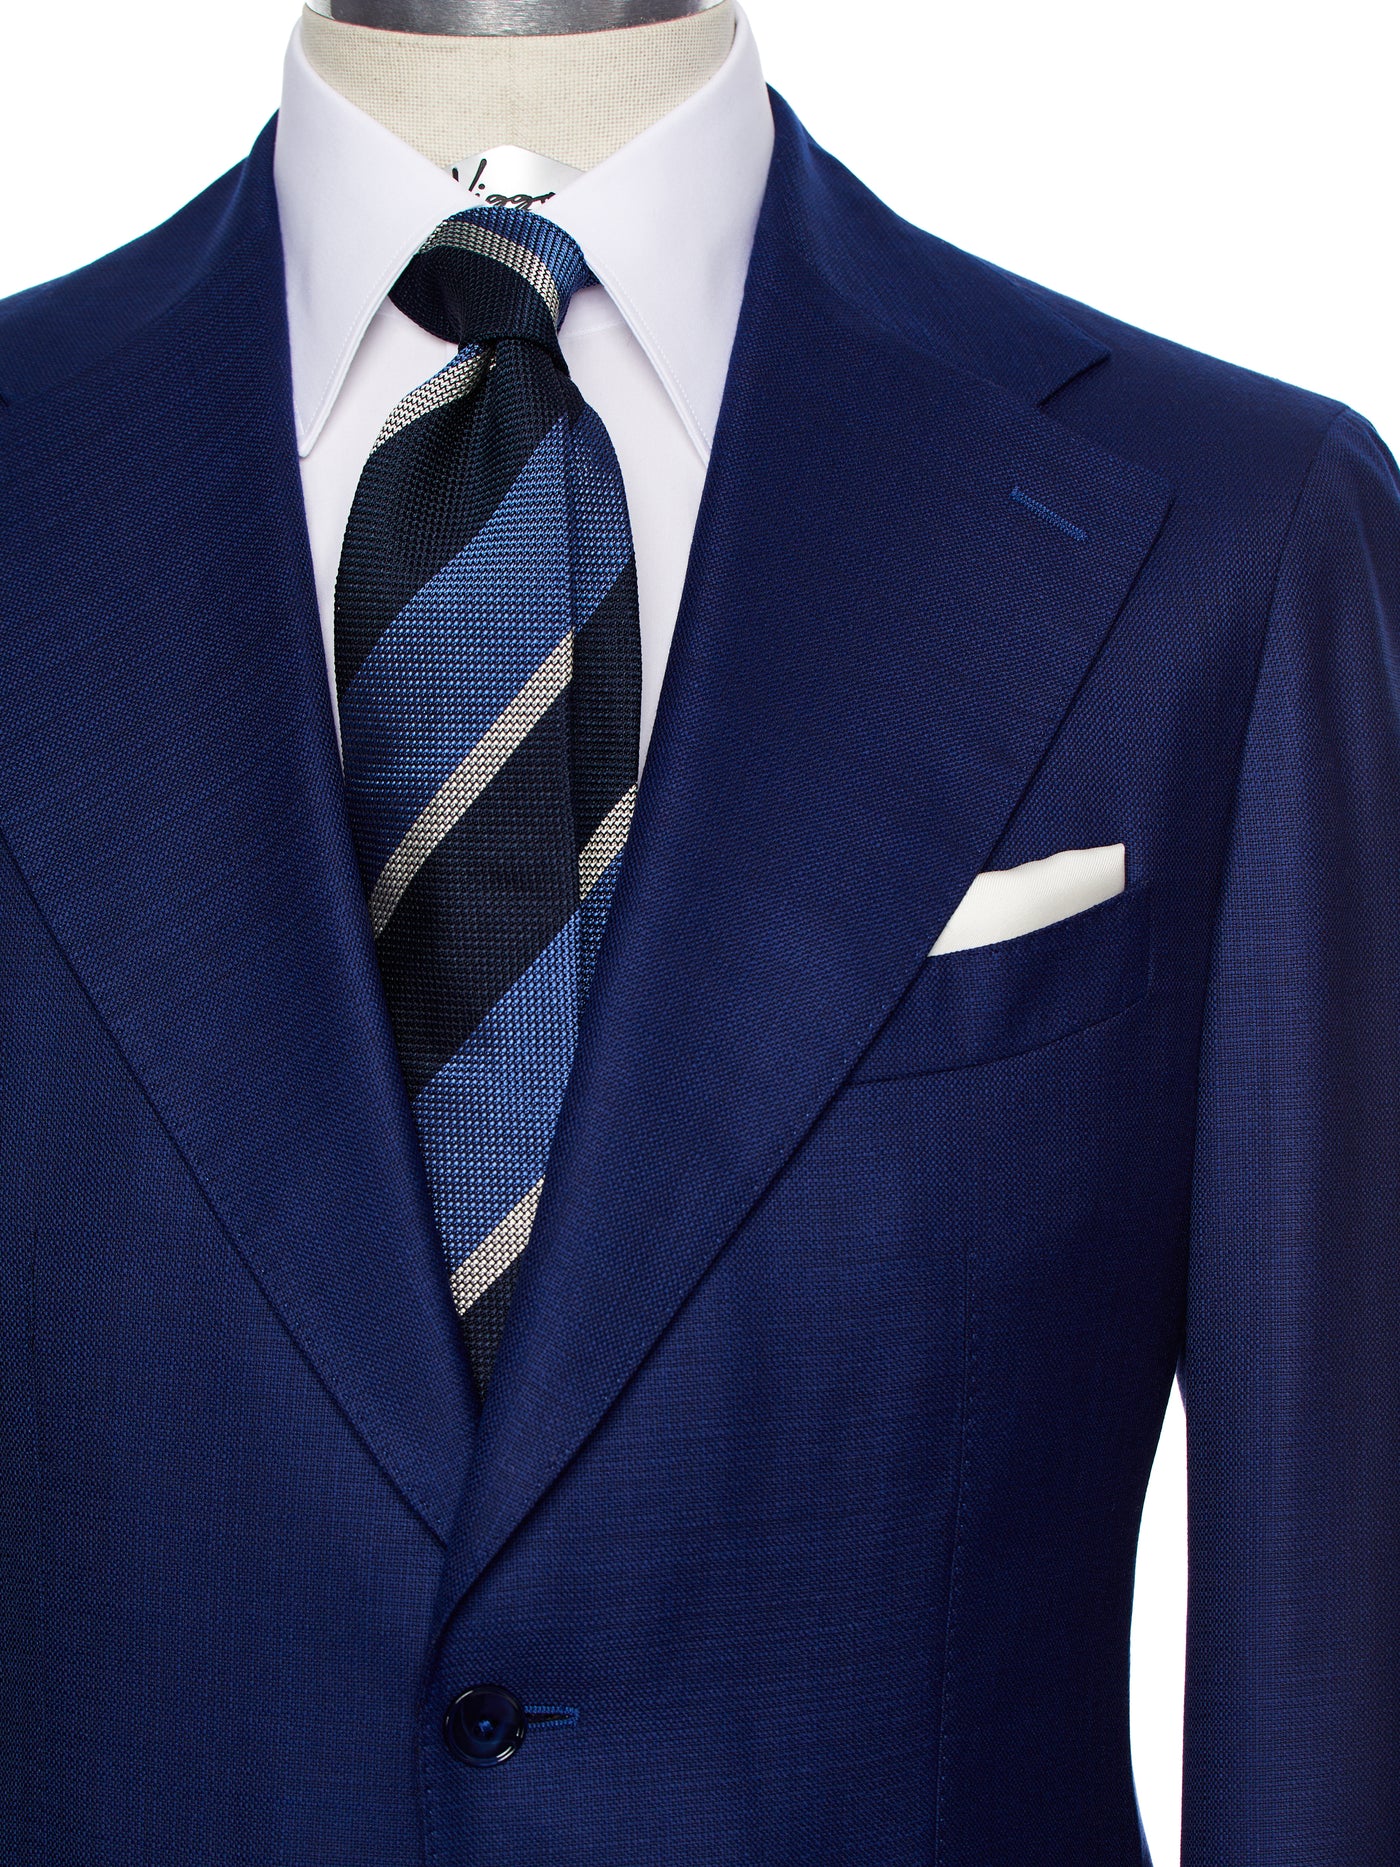 Navy blue two-piece suit with fine texture, tailored fit